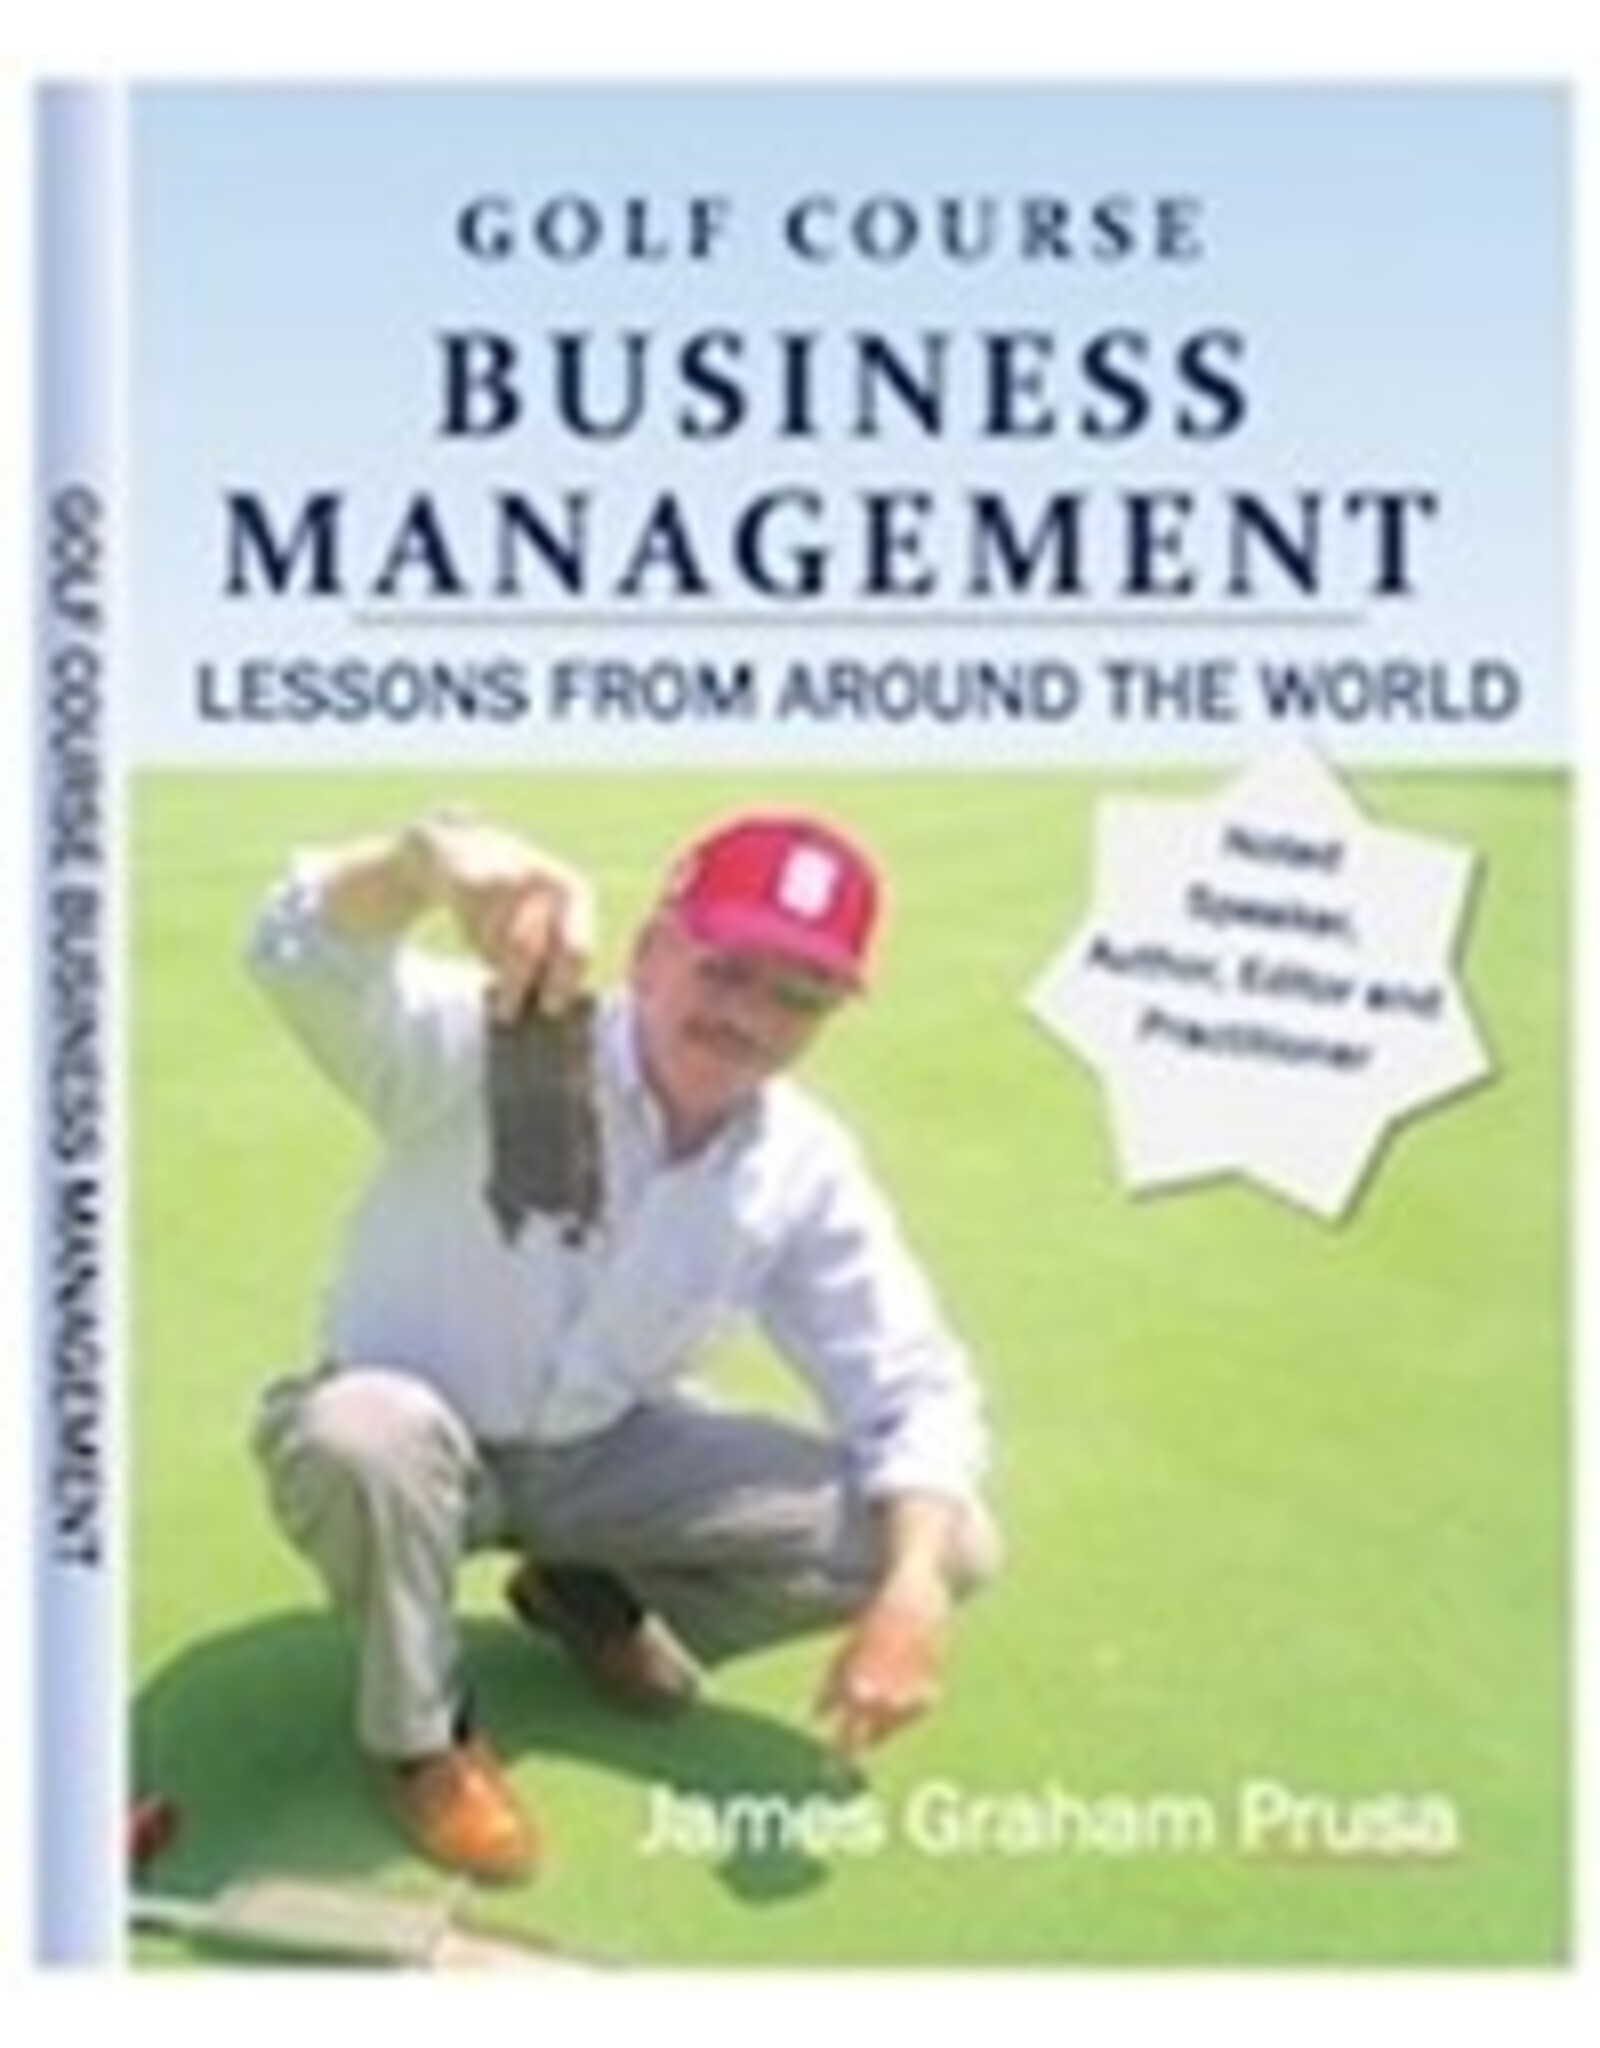 Golf Course Business Management - Hardcover